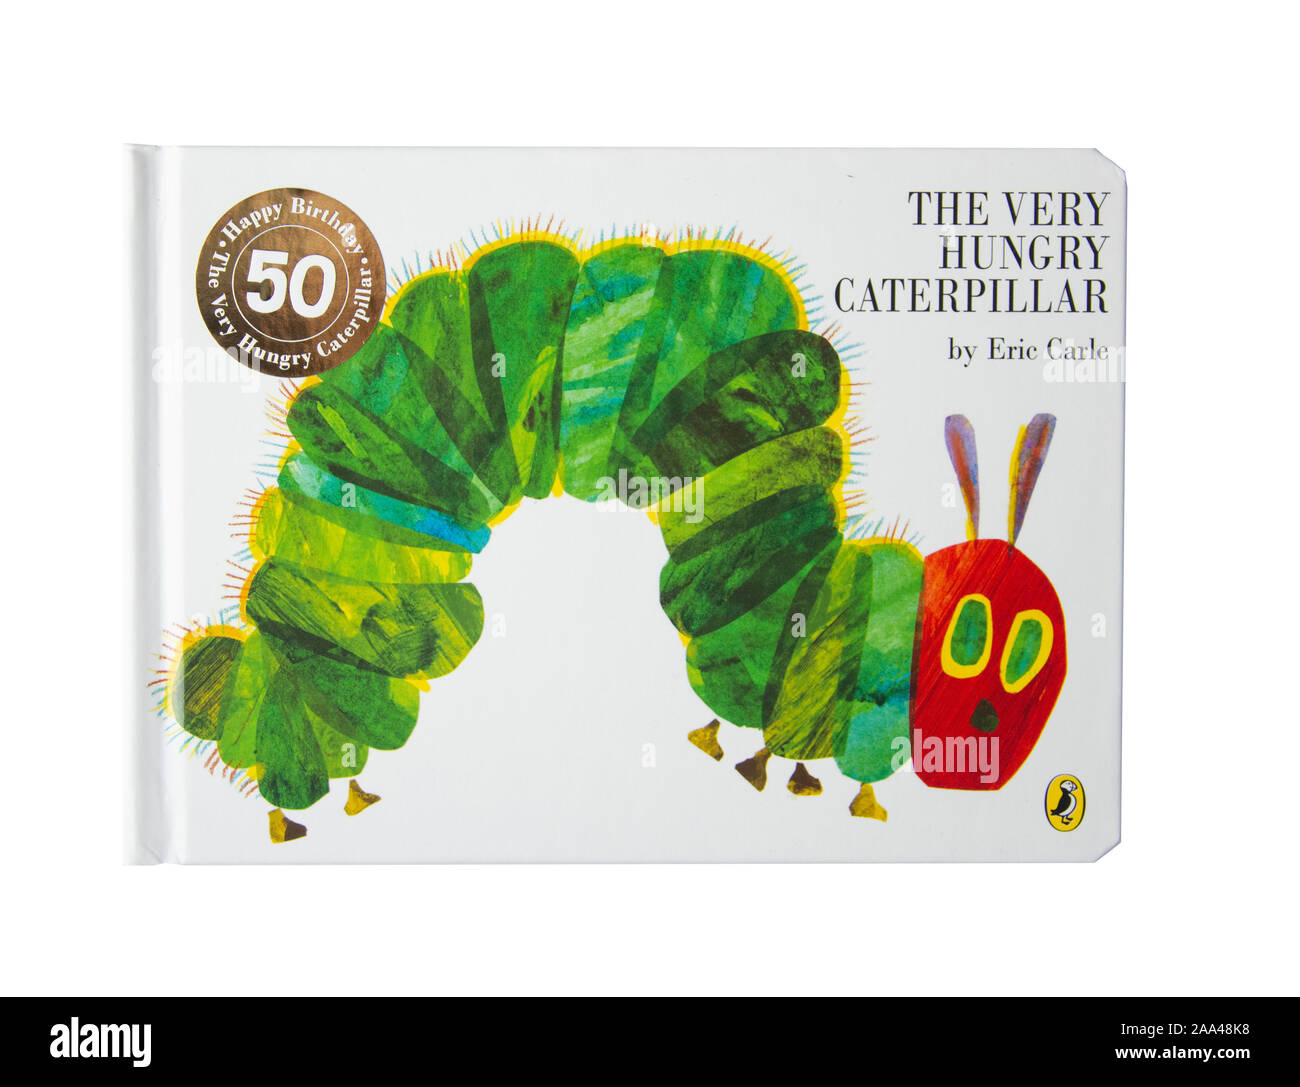 'The Very Hungry Caterpillar' children's book by Eric Carle, Greater London, England, United Kingdom Stock Photo